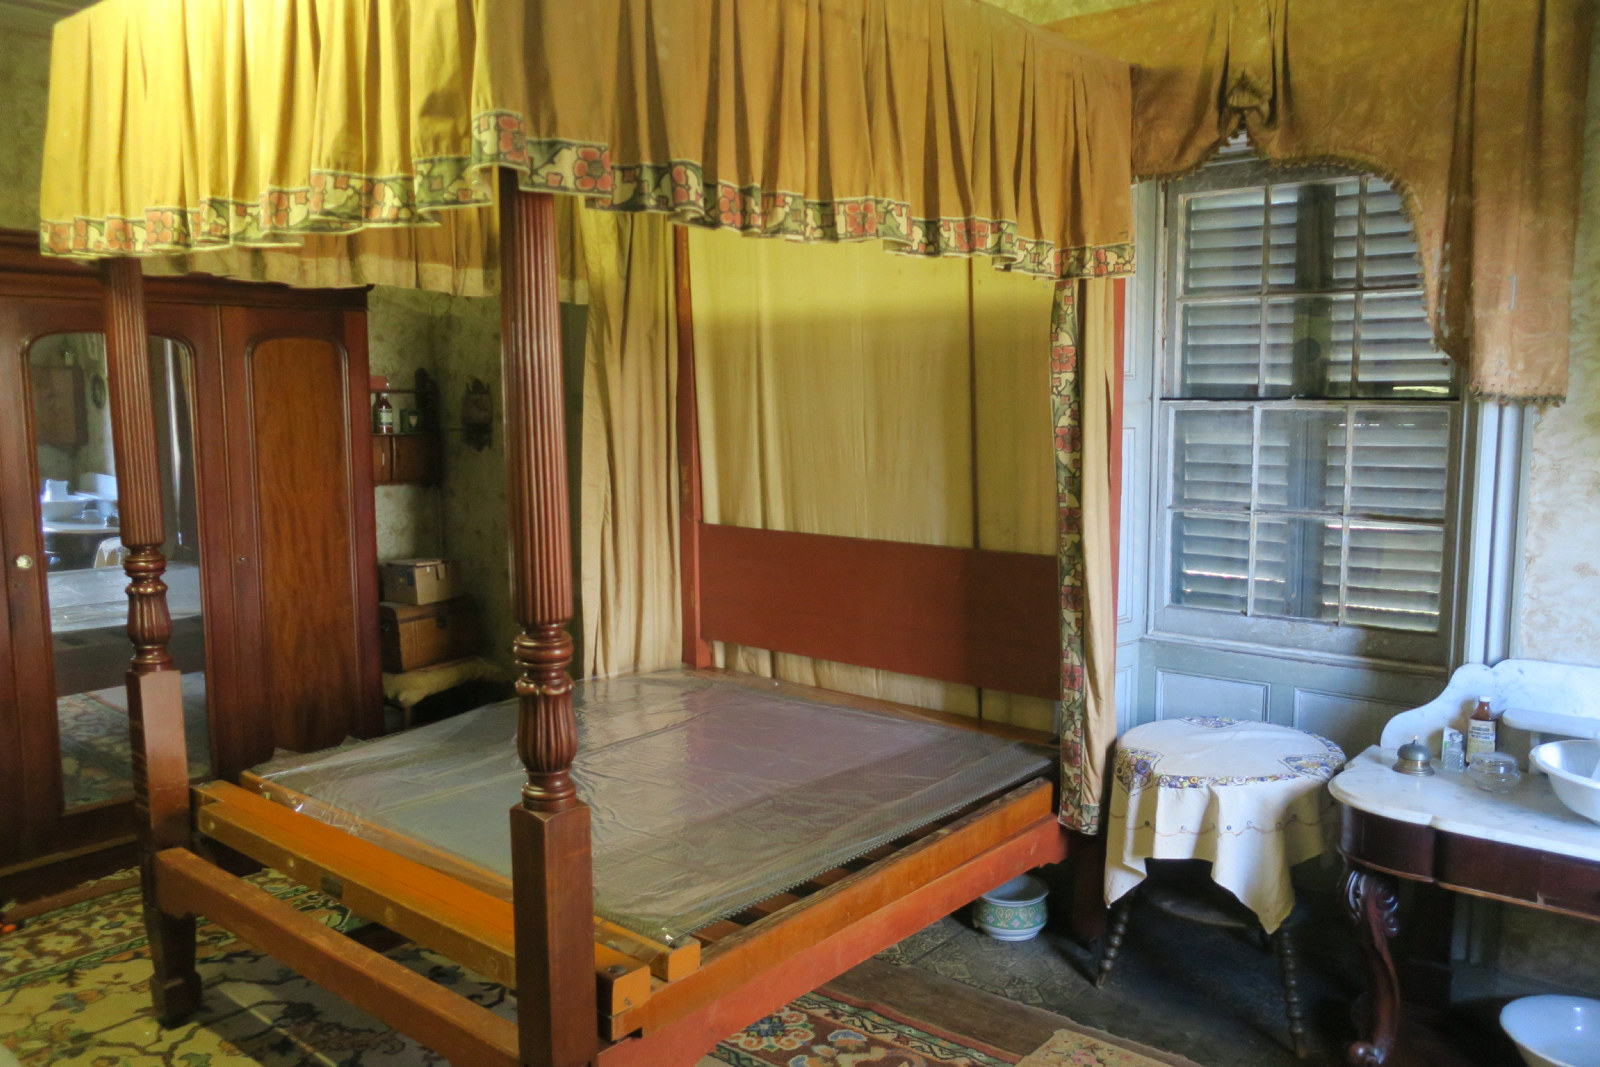 Interior view of bedroom, showing bedcovers being removed for cleaning.